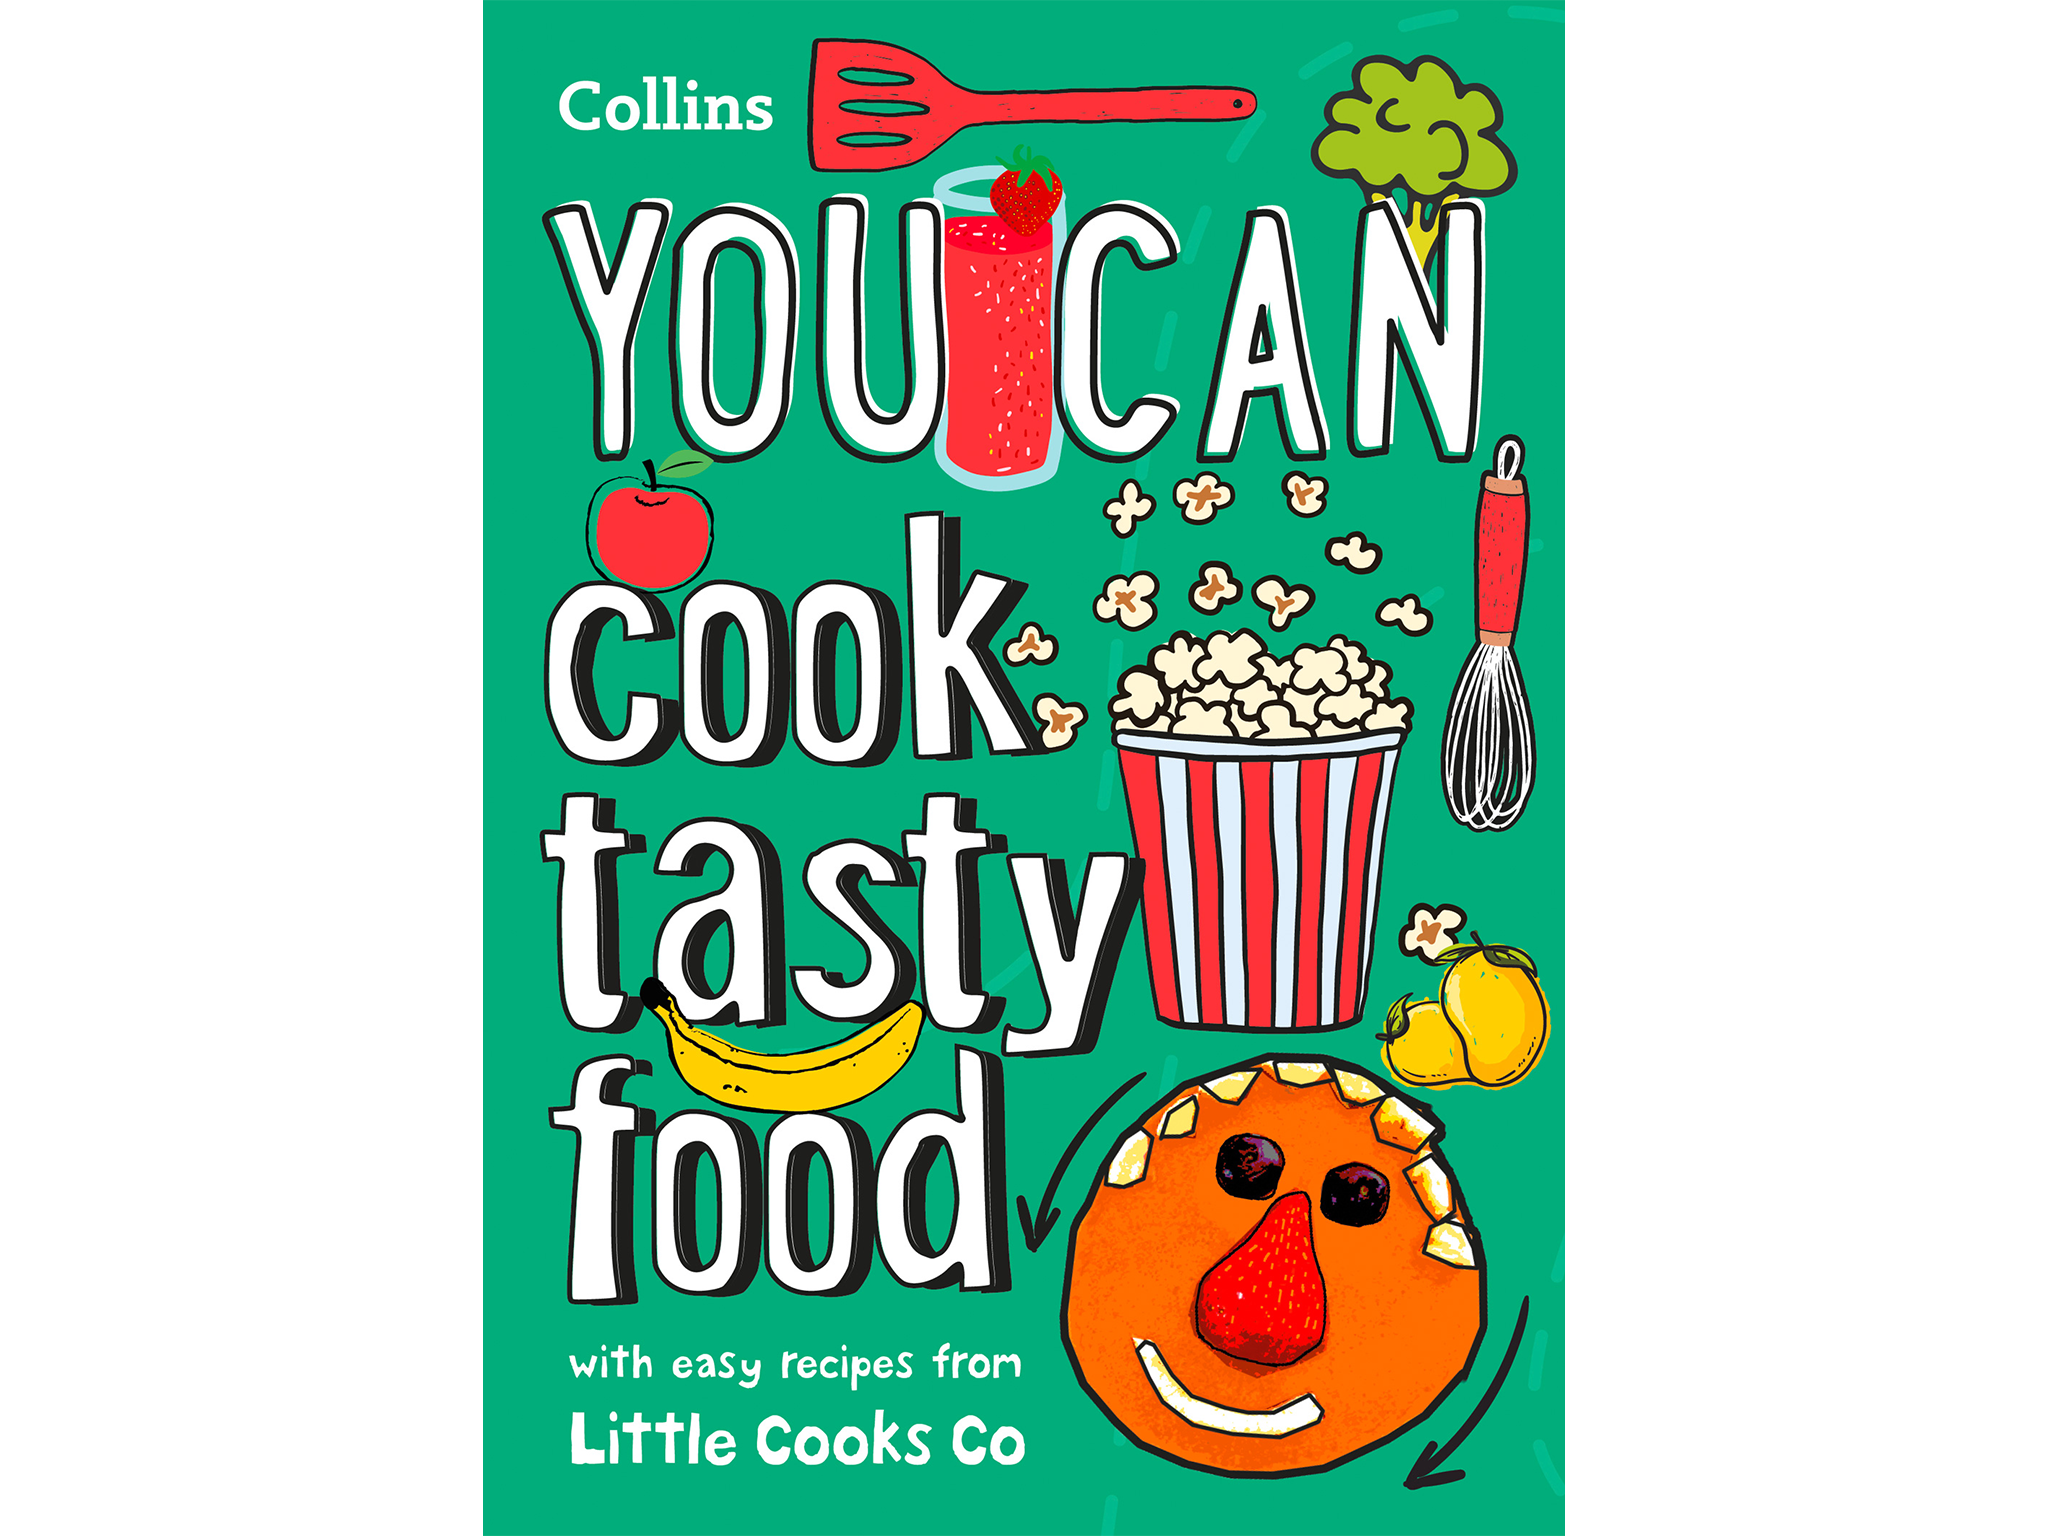 ‘YOU CAN COOK TASTY FOOD’ BY LITTLE COOKS COMPANY, PUBLISHED BY COLLINS